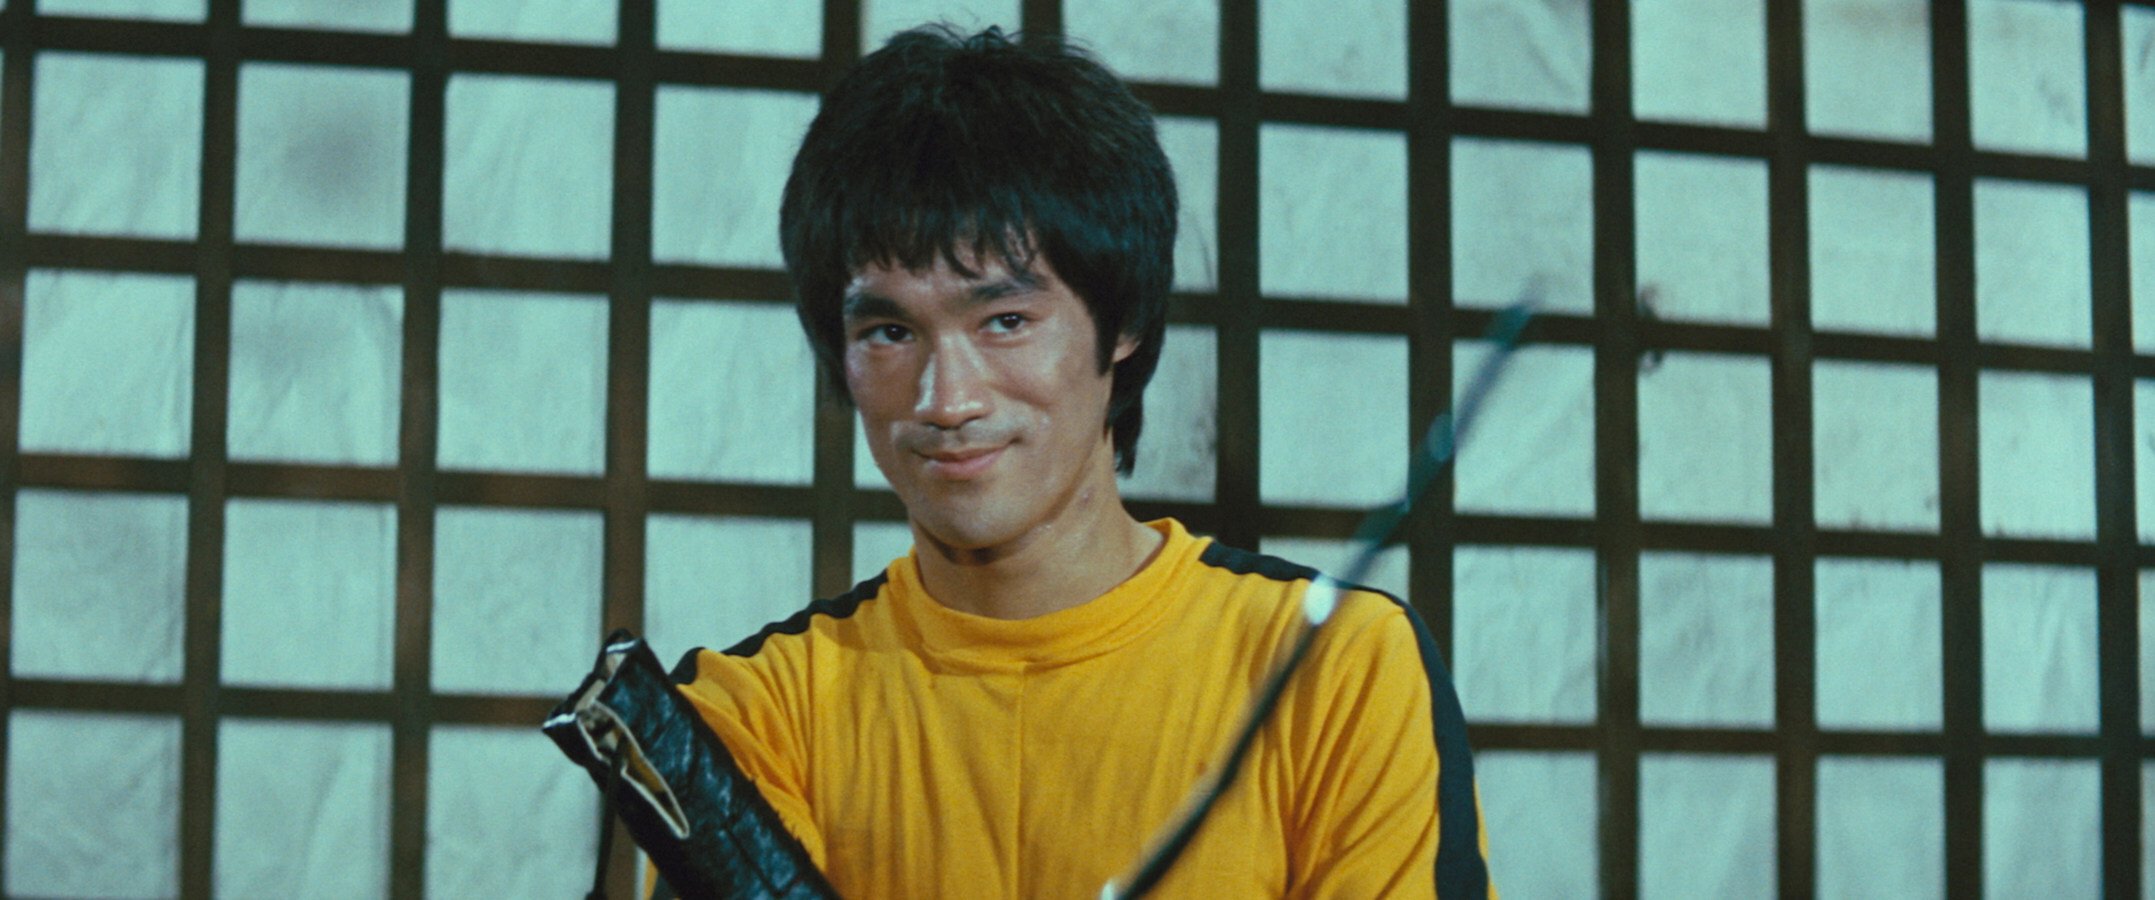 Bruce Lee in a still from Game of Death, released after his death. Photo: Criterion Collection